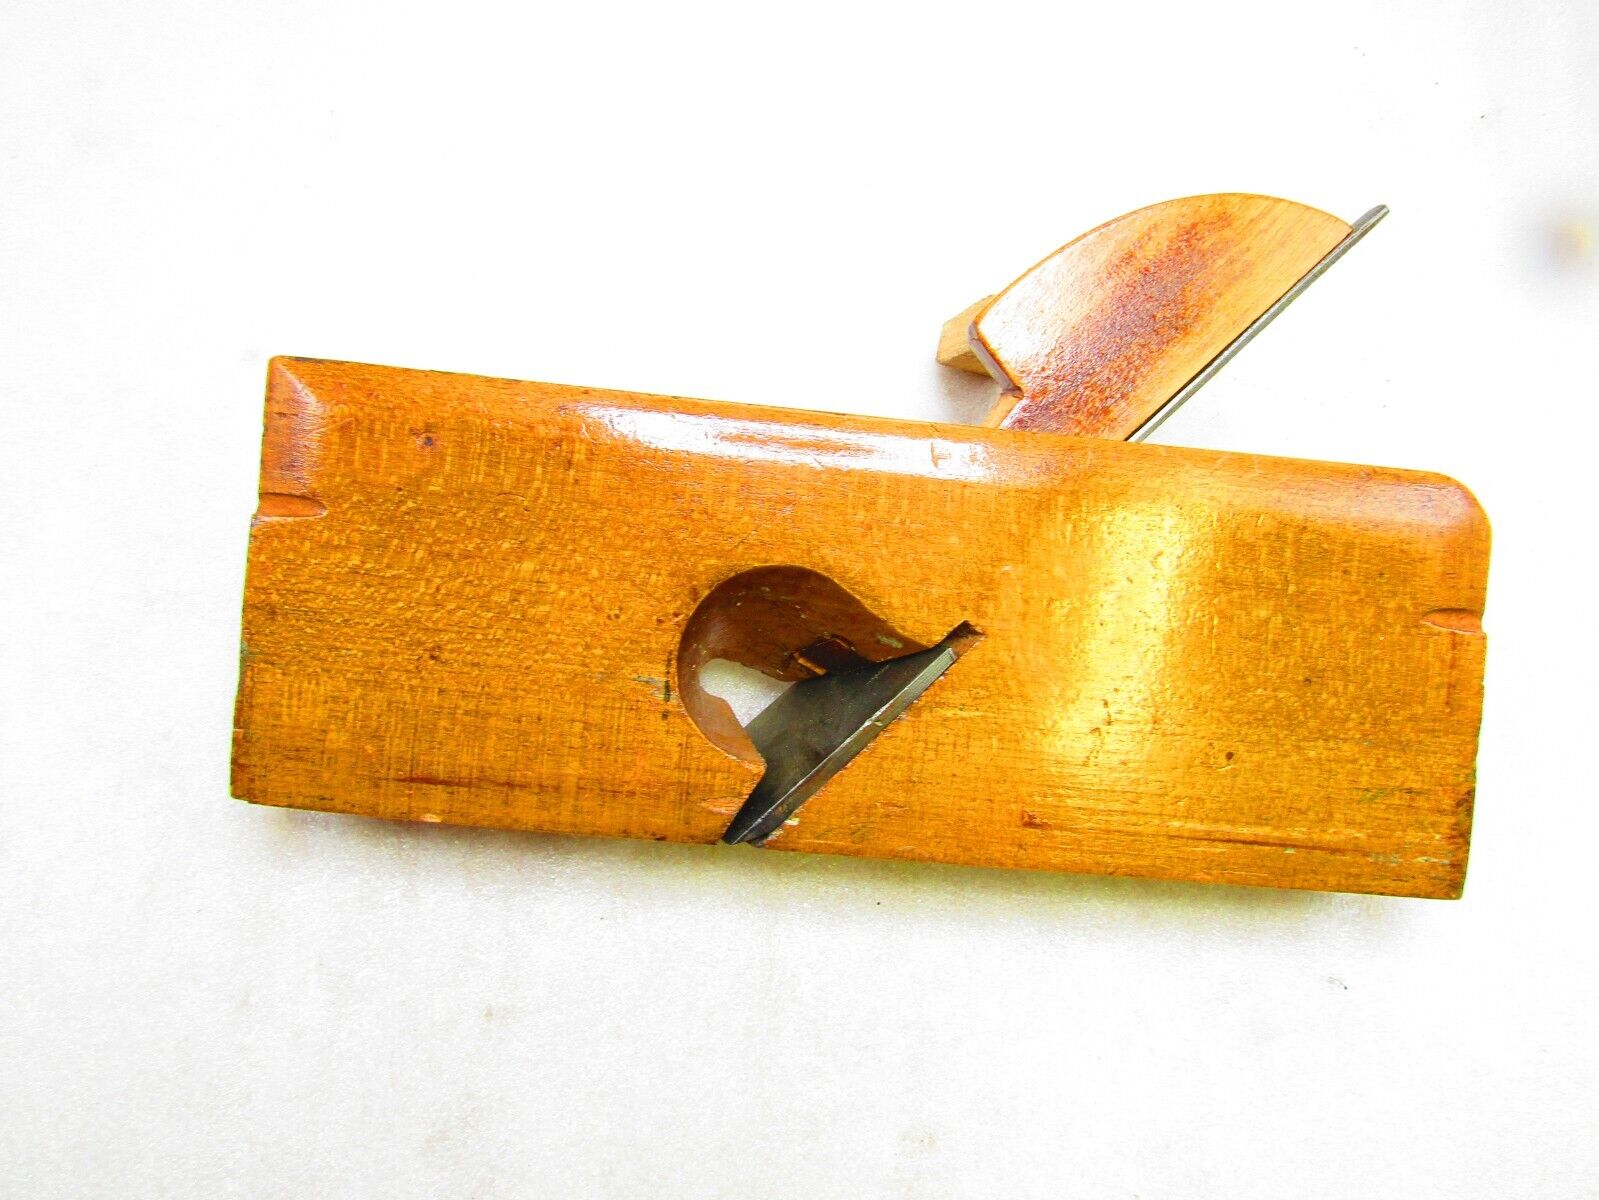 Antique rabbet plane by A. Howland